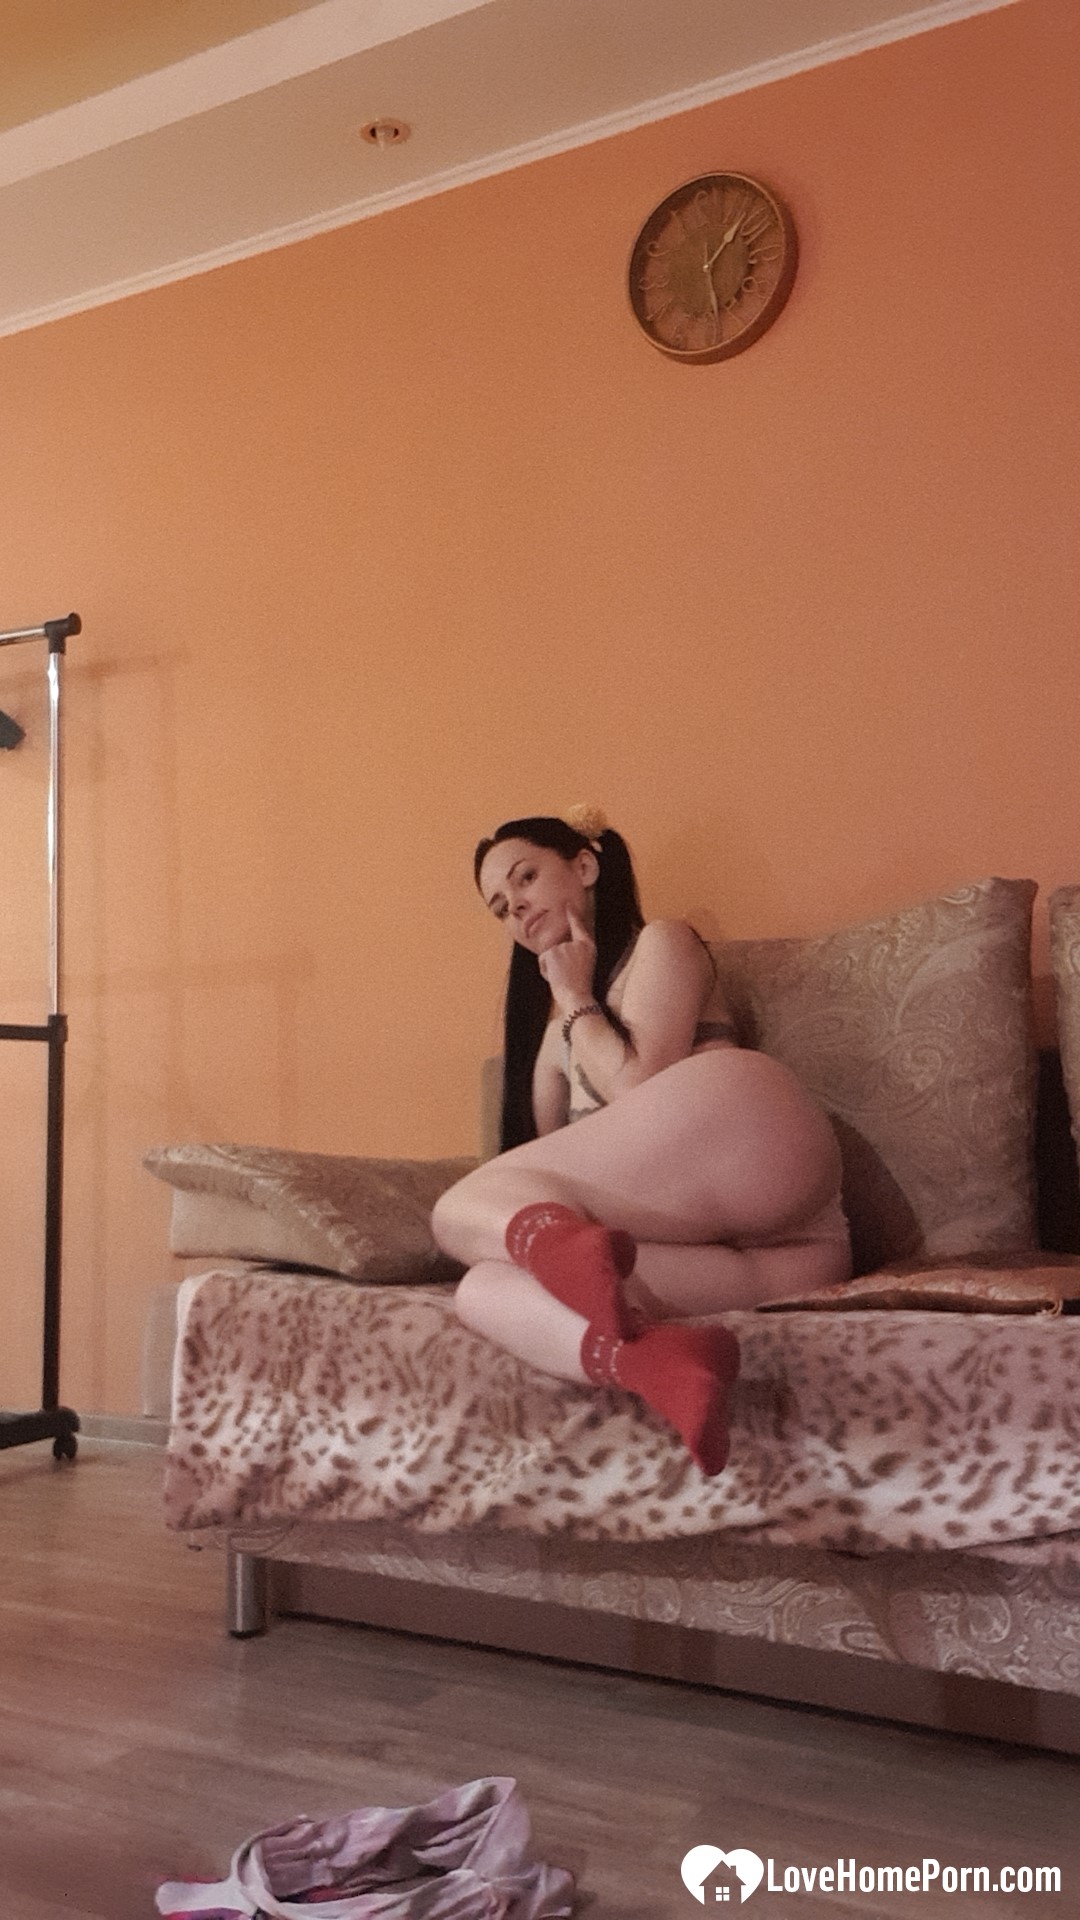 Brunette with pigtails poses in knee socks